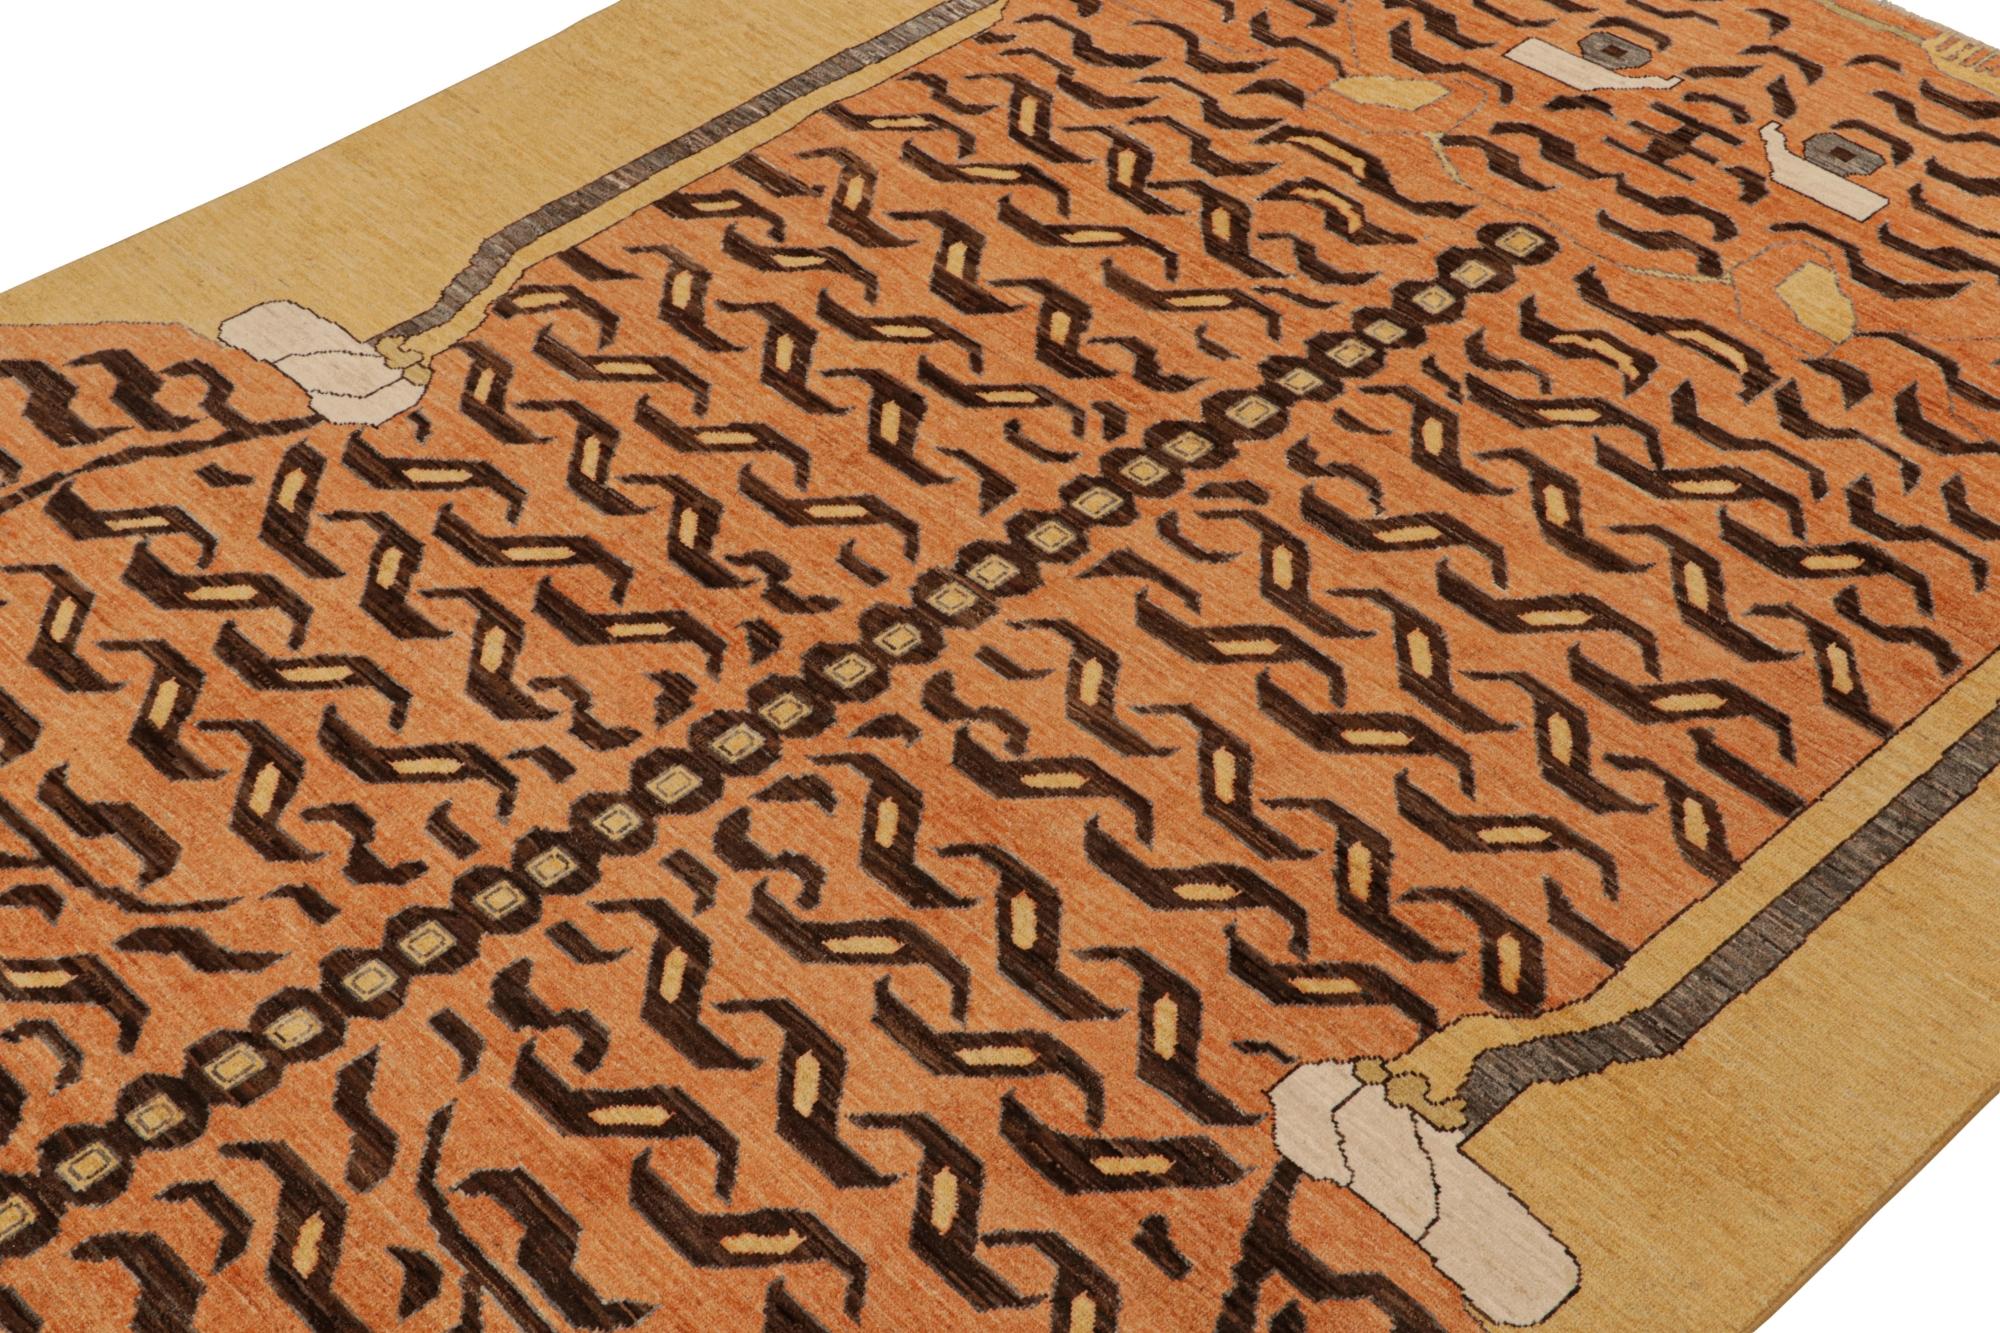 This contemporary 8x10 tiger rug is a bold new addition to Rug & Kilim’s Tigers Collection. Our collection spans several cultures and recaptures iconic pictorial styles in folk art and handmade antique Oriental rugs alike. 

Further on the